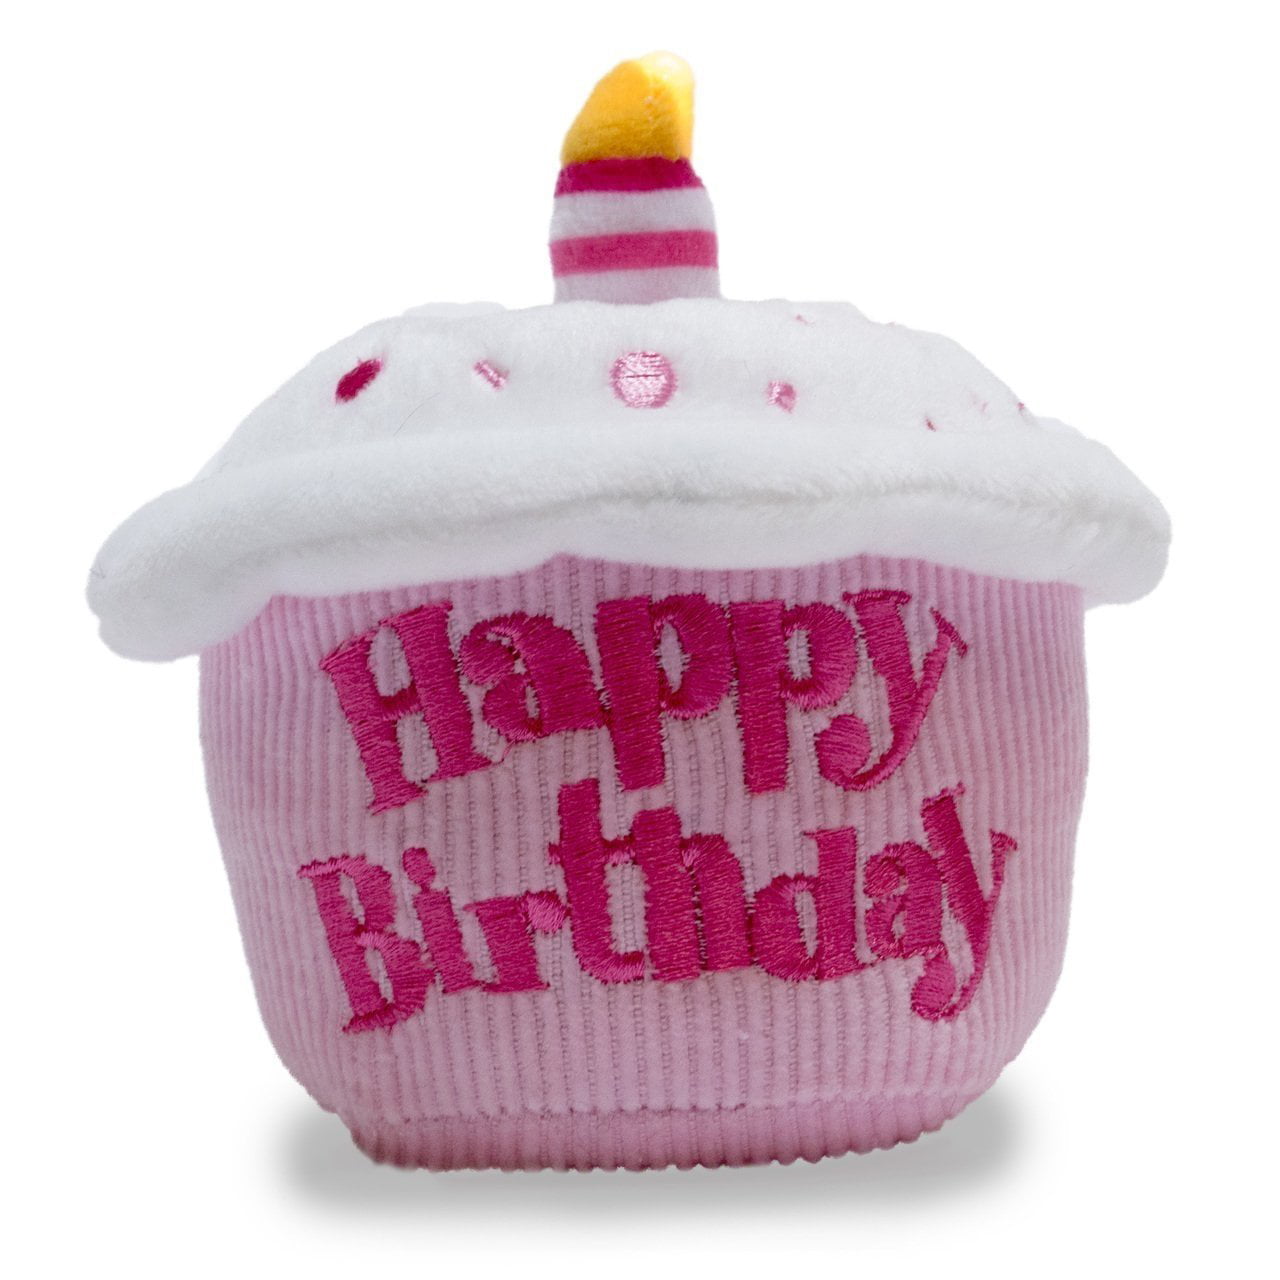 Pink Cuddle Barn Birthday Cupcake Squeezer Lights Up and Plays Happy Birthday When Squeezed SG_B07BDQHN5C_US